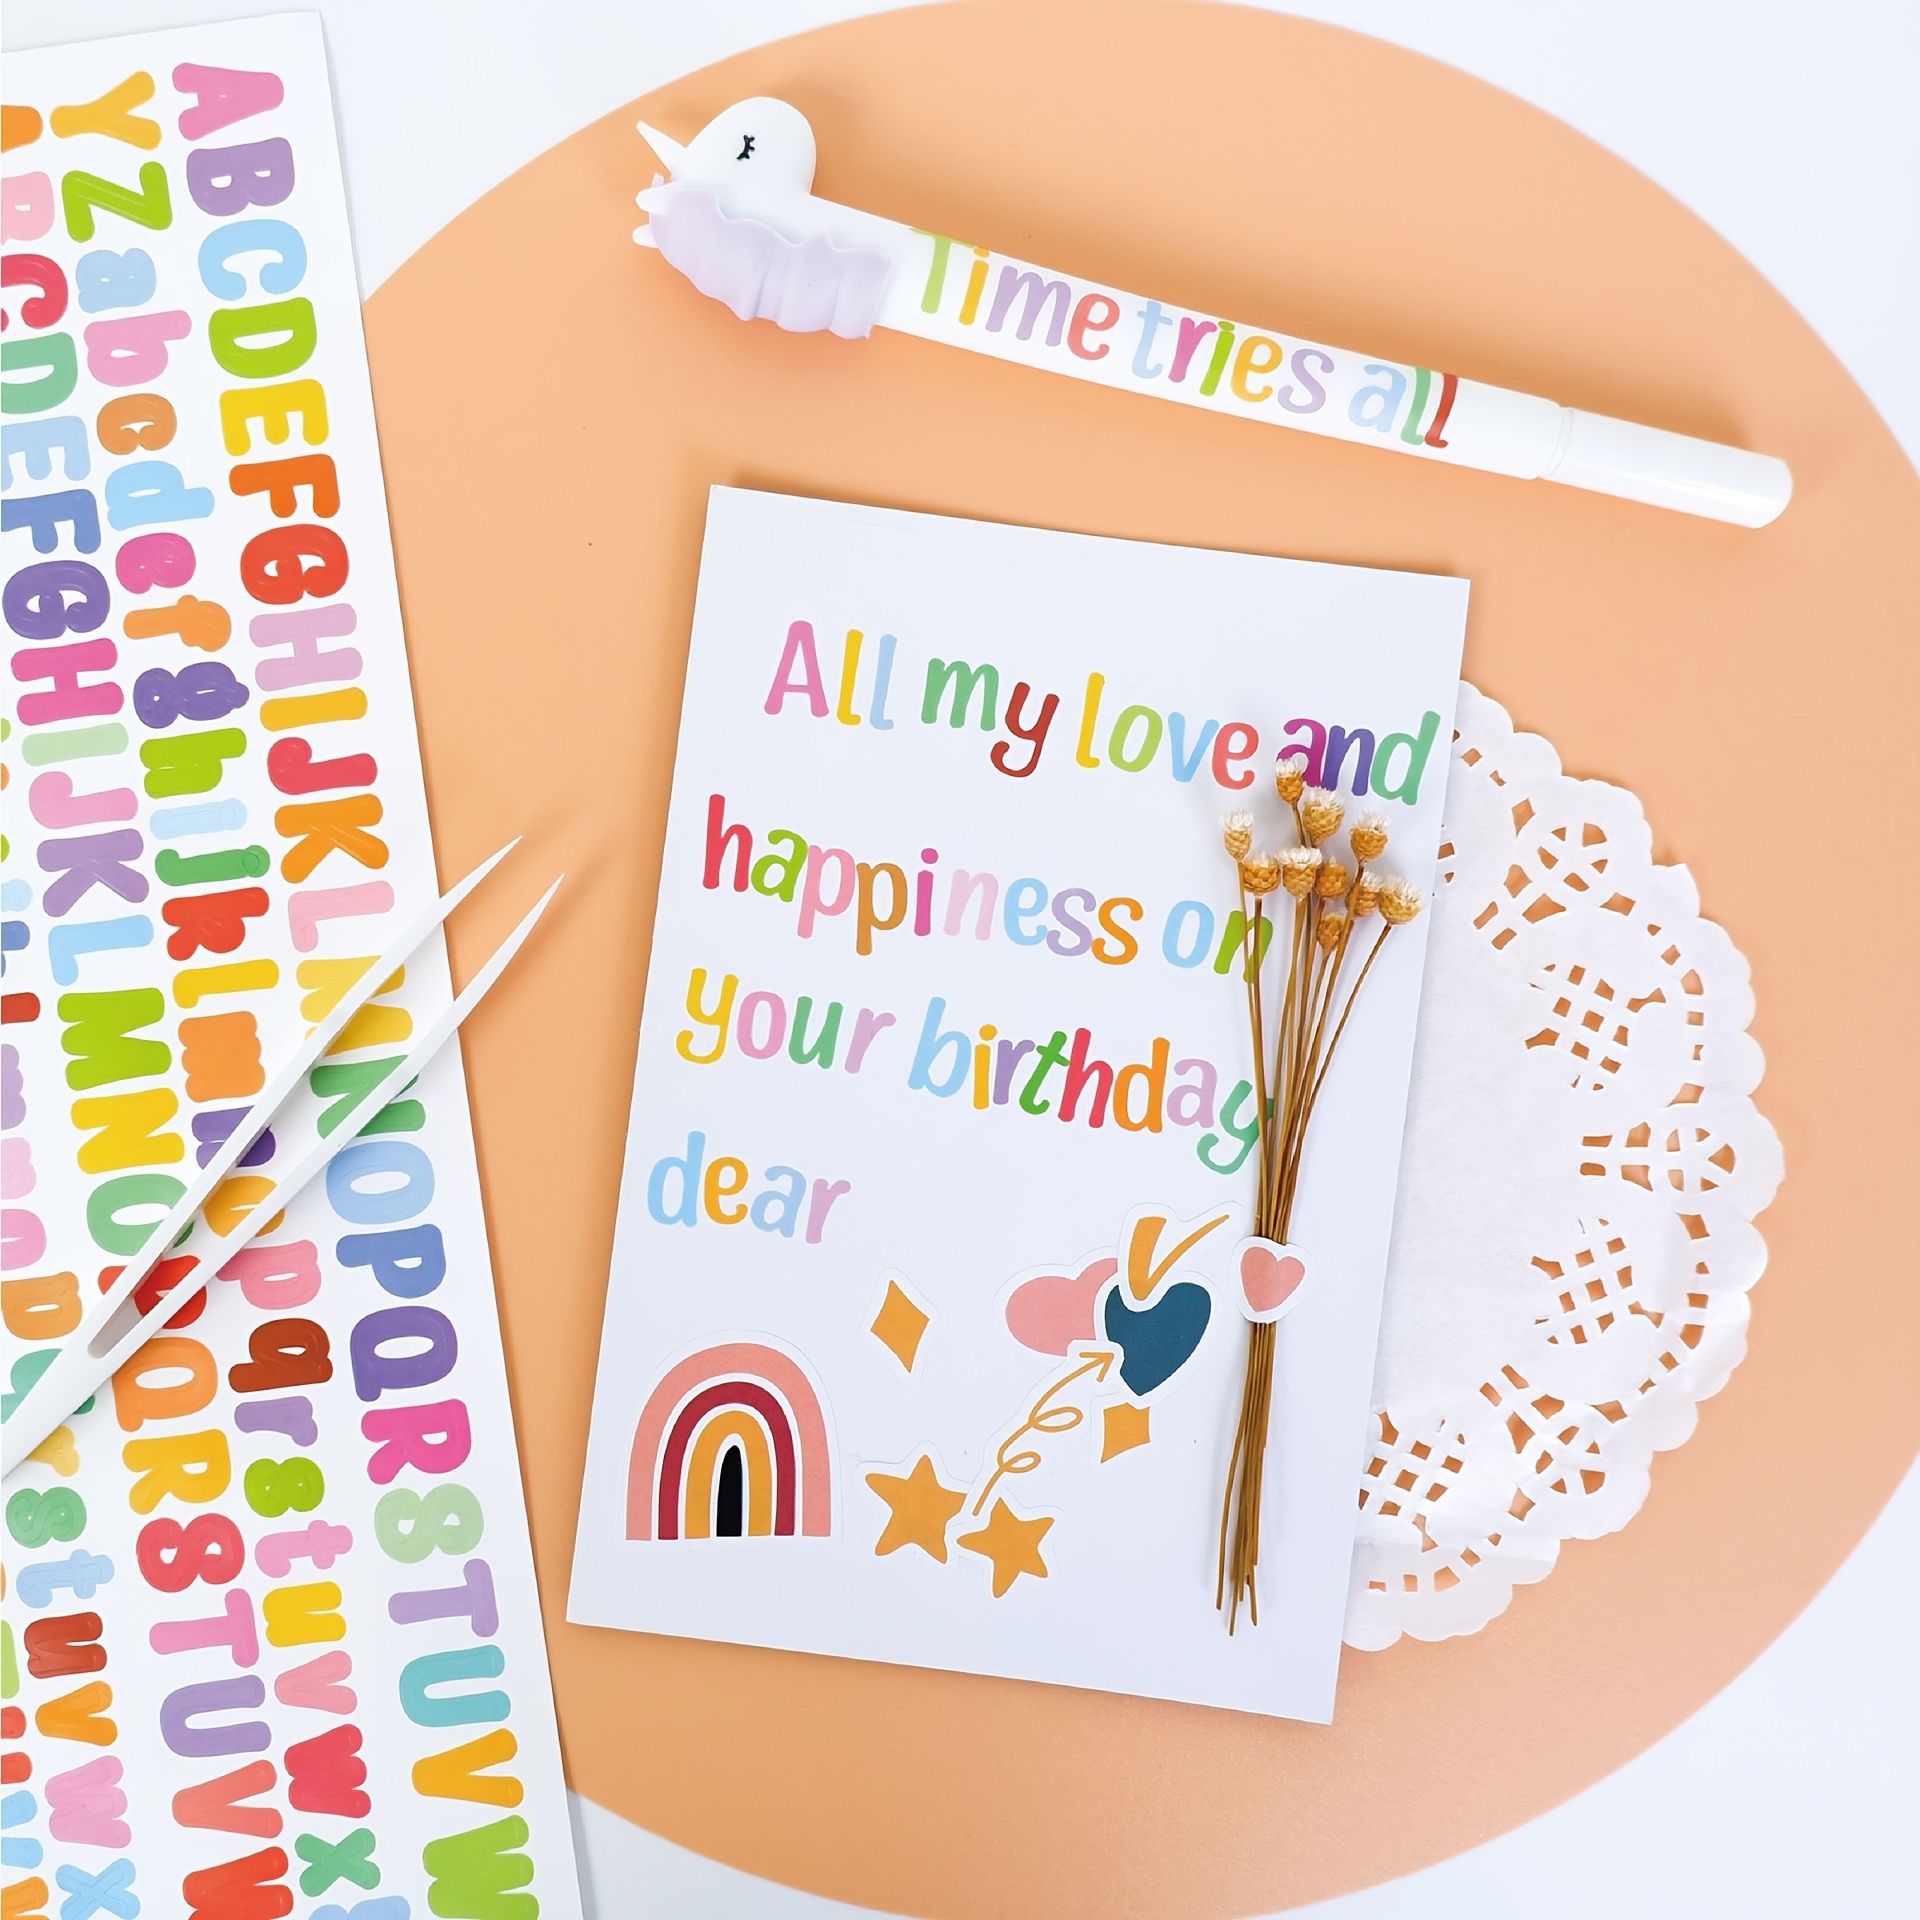  10 Sheets Large Letter Stickers, 500 Pcs 2 Inch Alphabet  Stickers, Self Adhesive Vinyl Letter Stickers for School Project Classroom  Bulletin Board Kids Crafts Mailbox Aldults DIY Decor (White) : Office  Products